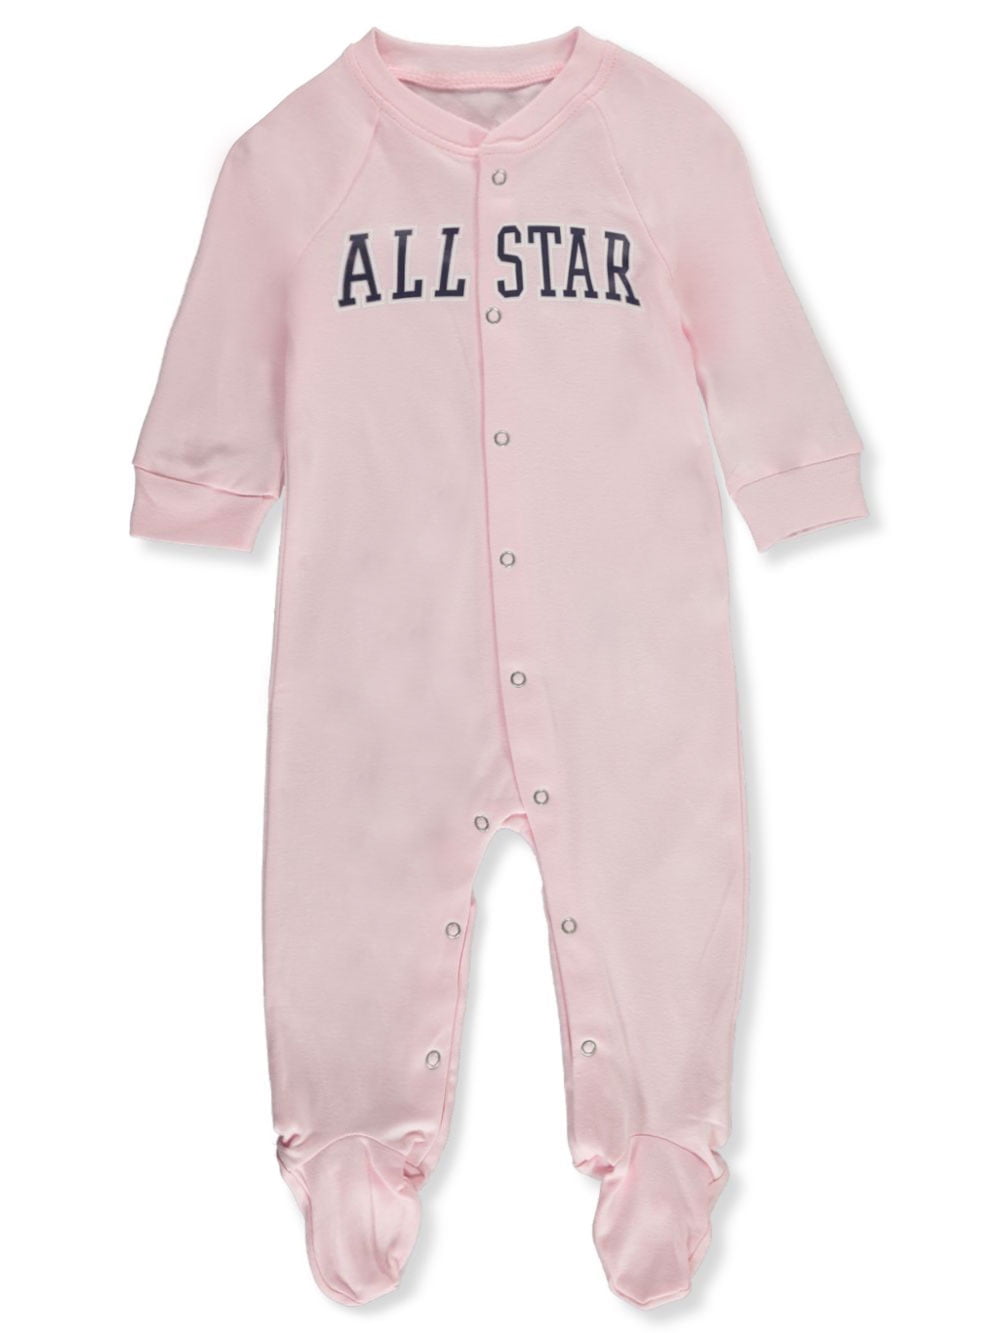 Converse Baby Clothing | Babies 0-24 